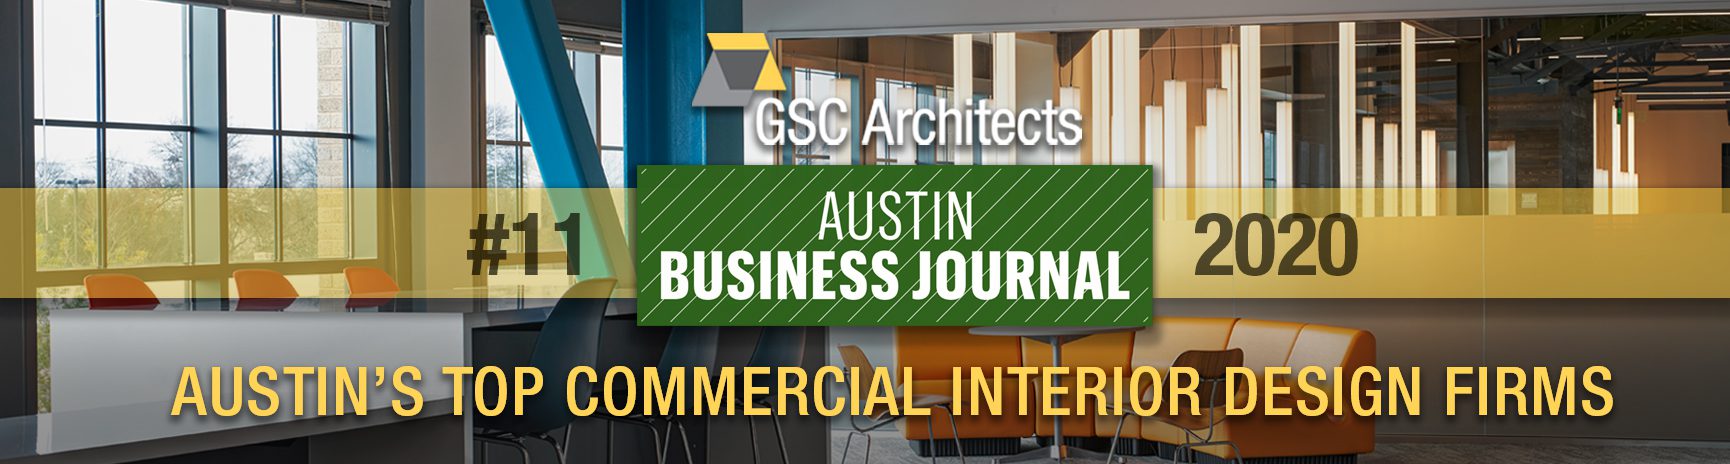 ABJ Top 2020 in 2020 Commercial Interior Design Firms